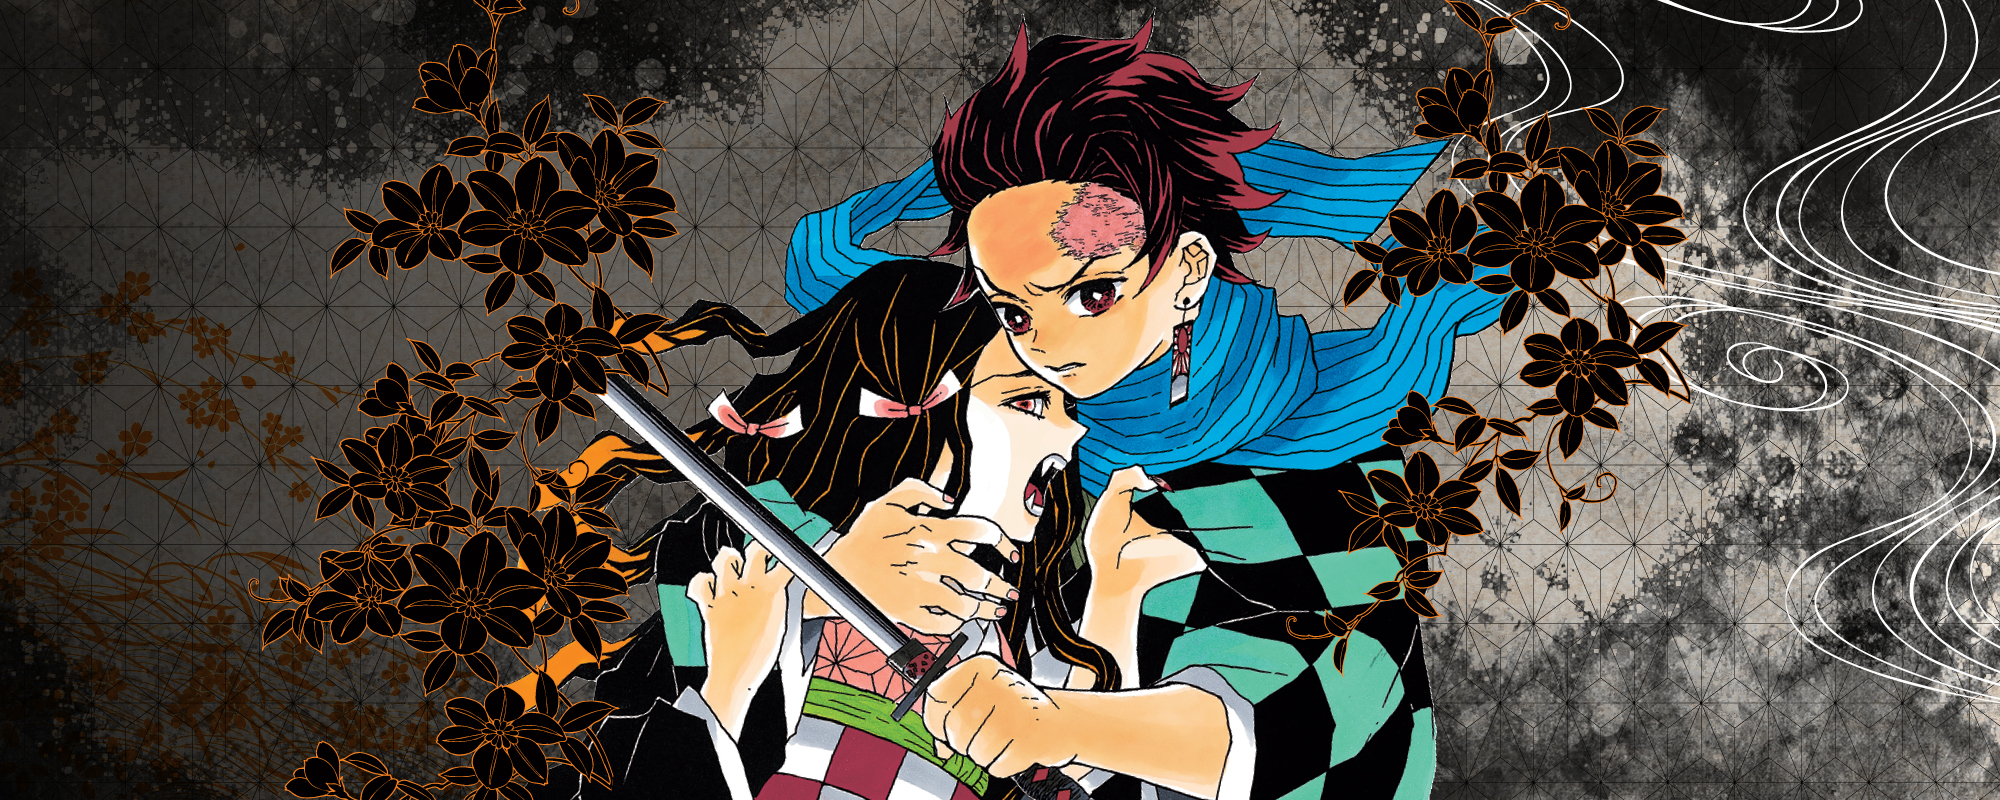 Demon Slayer Kimetsu no Yaiba Chapter 198 Release Date, Raw Scans and Read Online